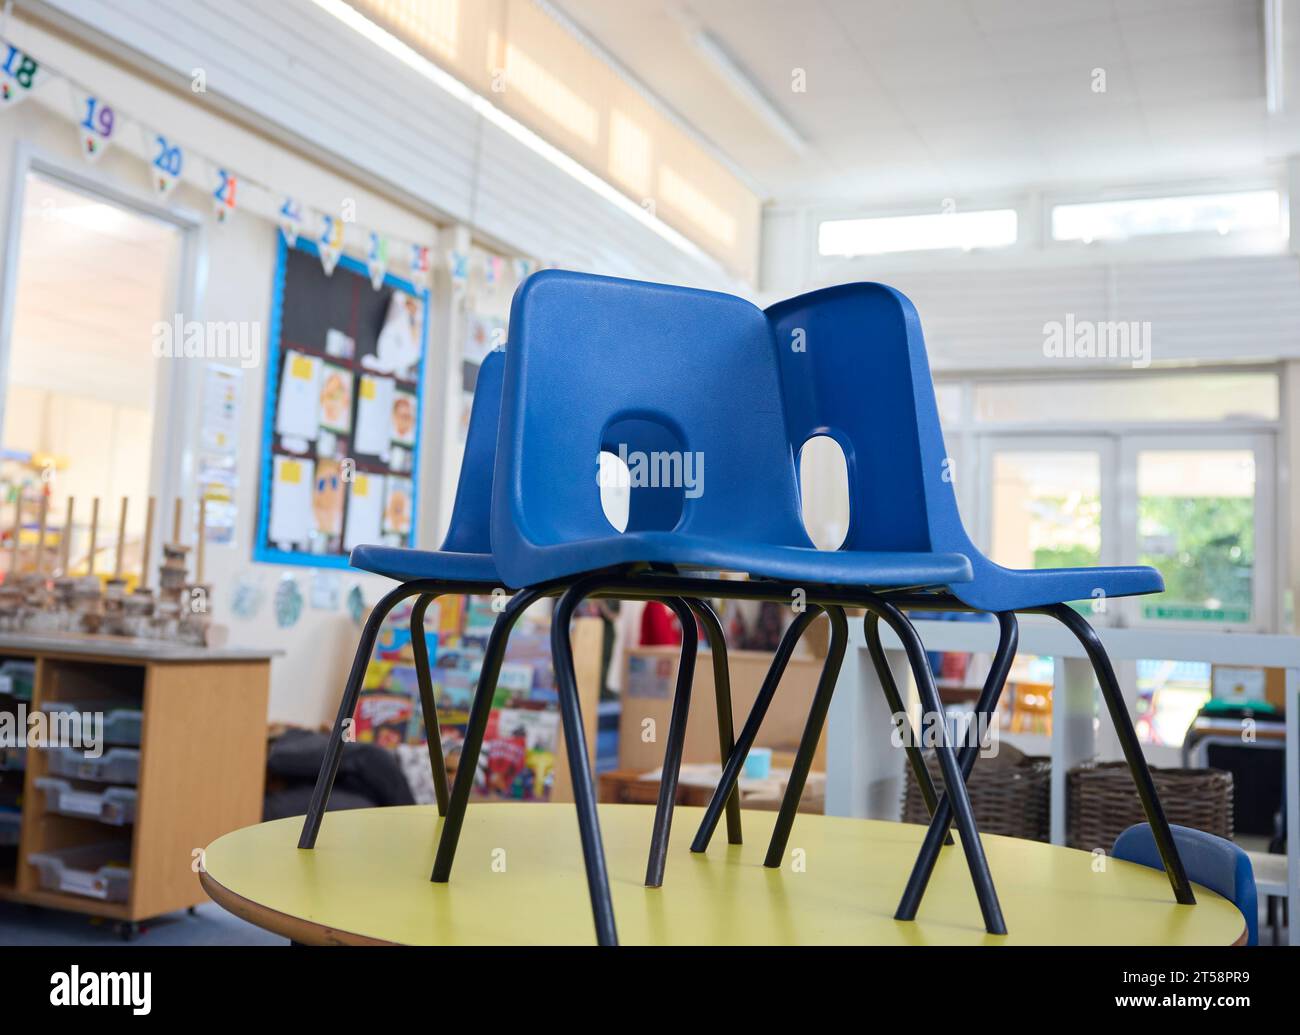 Chairs On Tables In Empty Primary Or Elementary School Classroom At End Of The Day Stock Photo